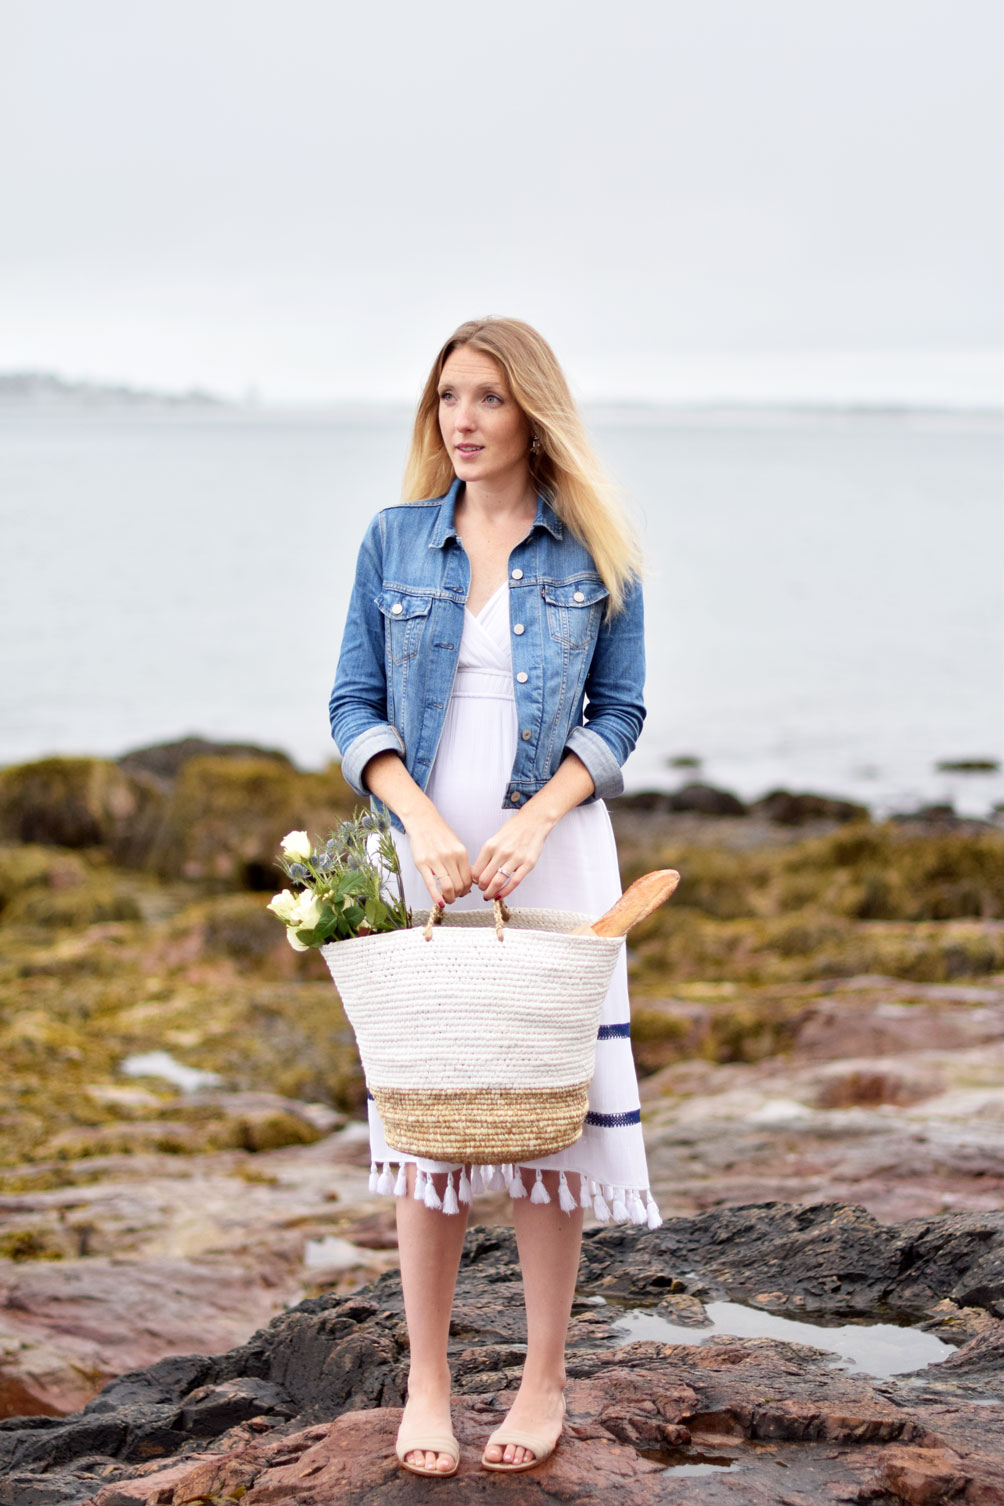 lifestyle blogger Leslie Musser of one brass fox shares how to host the perfect summer picnic with Boston Interiors